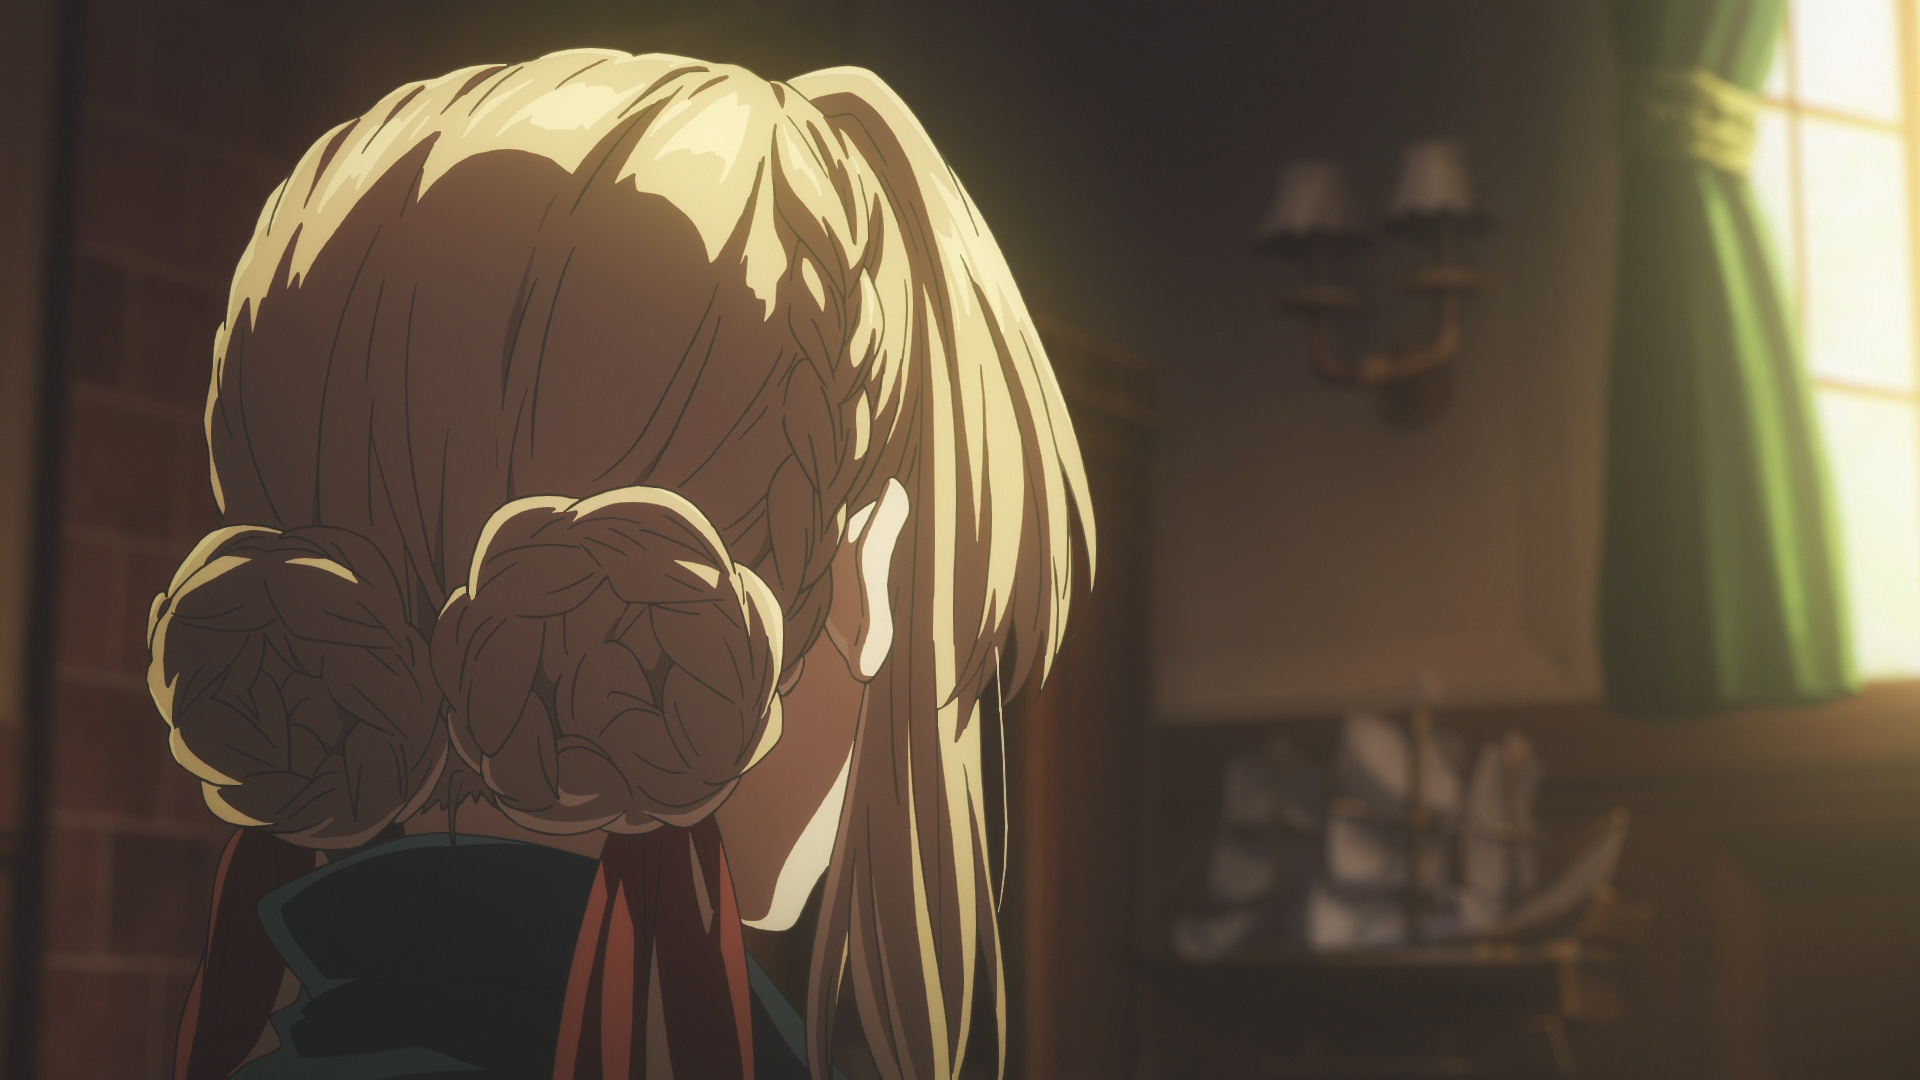 Violet Evergarden Blu-ray Media Review Episode 3 | Anime Solution